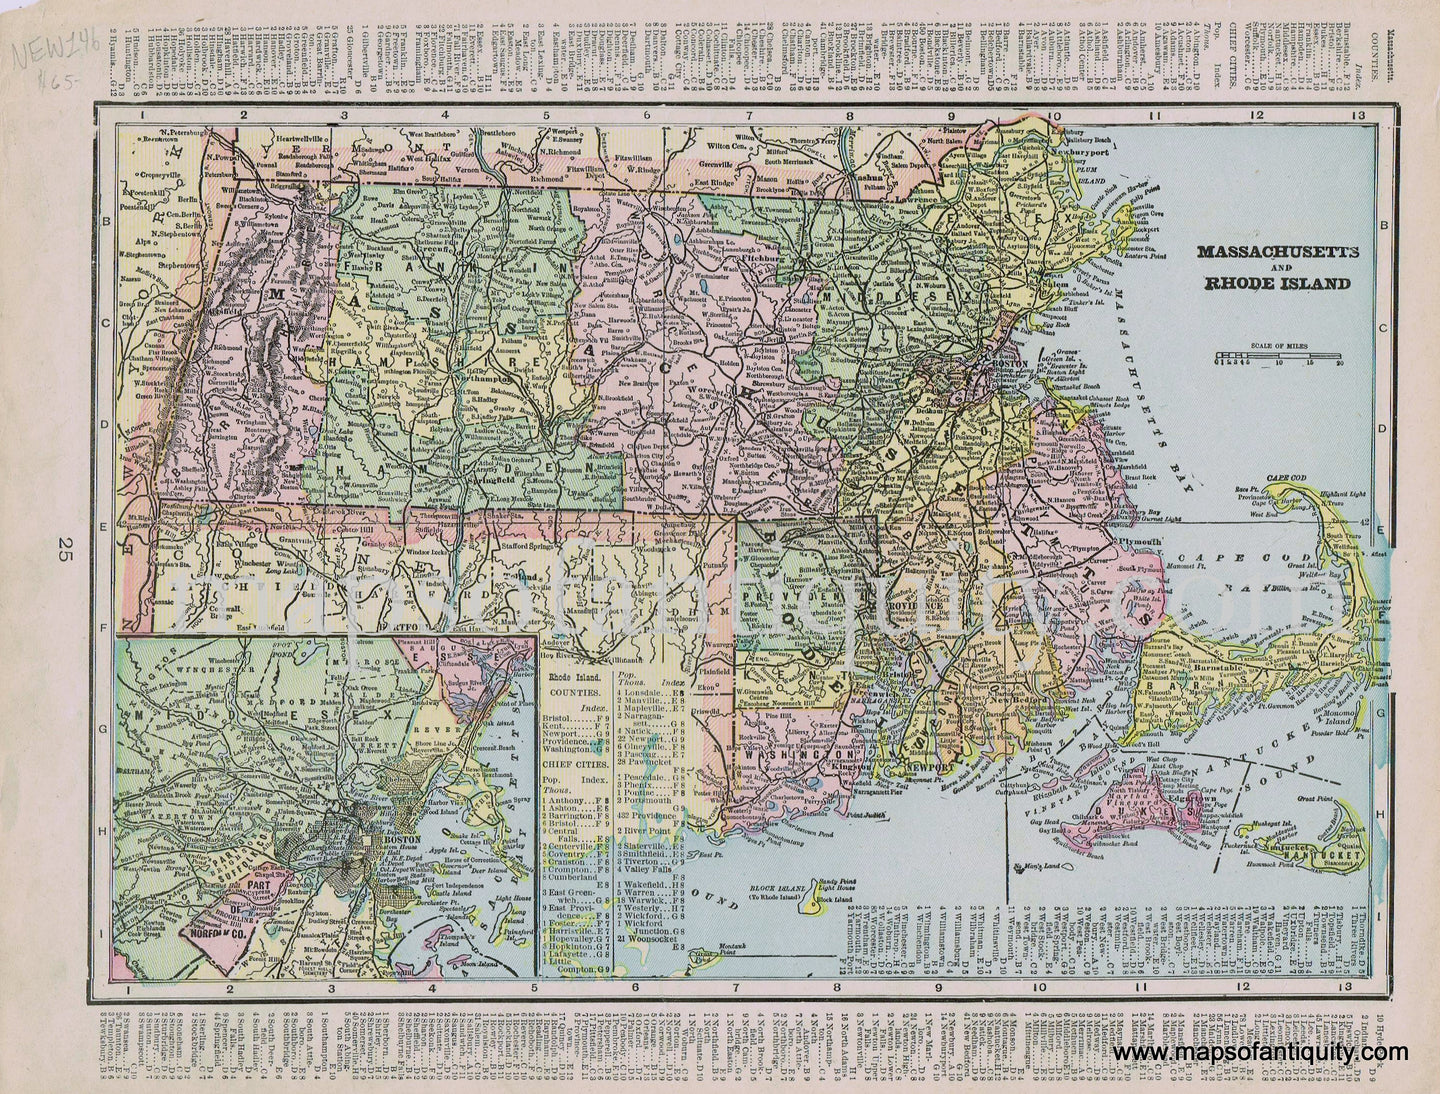 Antique-Printed-Color-Map-Massachusetts-and-Rhode-Island-Verso:-Connecticut-Rand-McNally-New-England-Massachusetts-Rhode-Island-Connecticut-1800s-19th-century-Maps-of-Antiquity